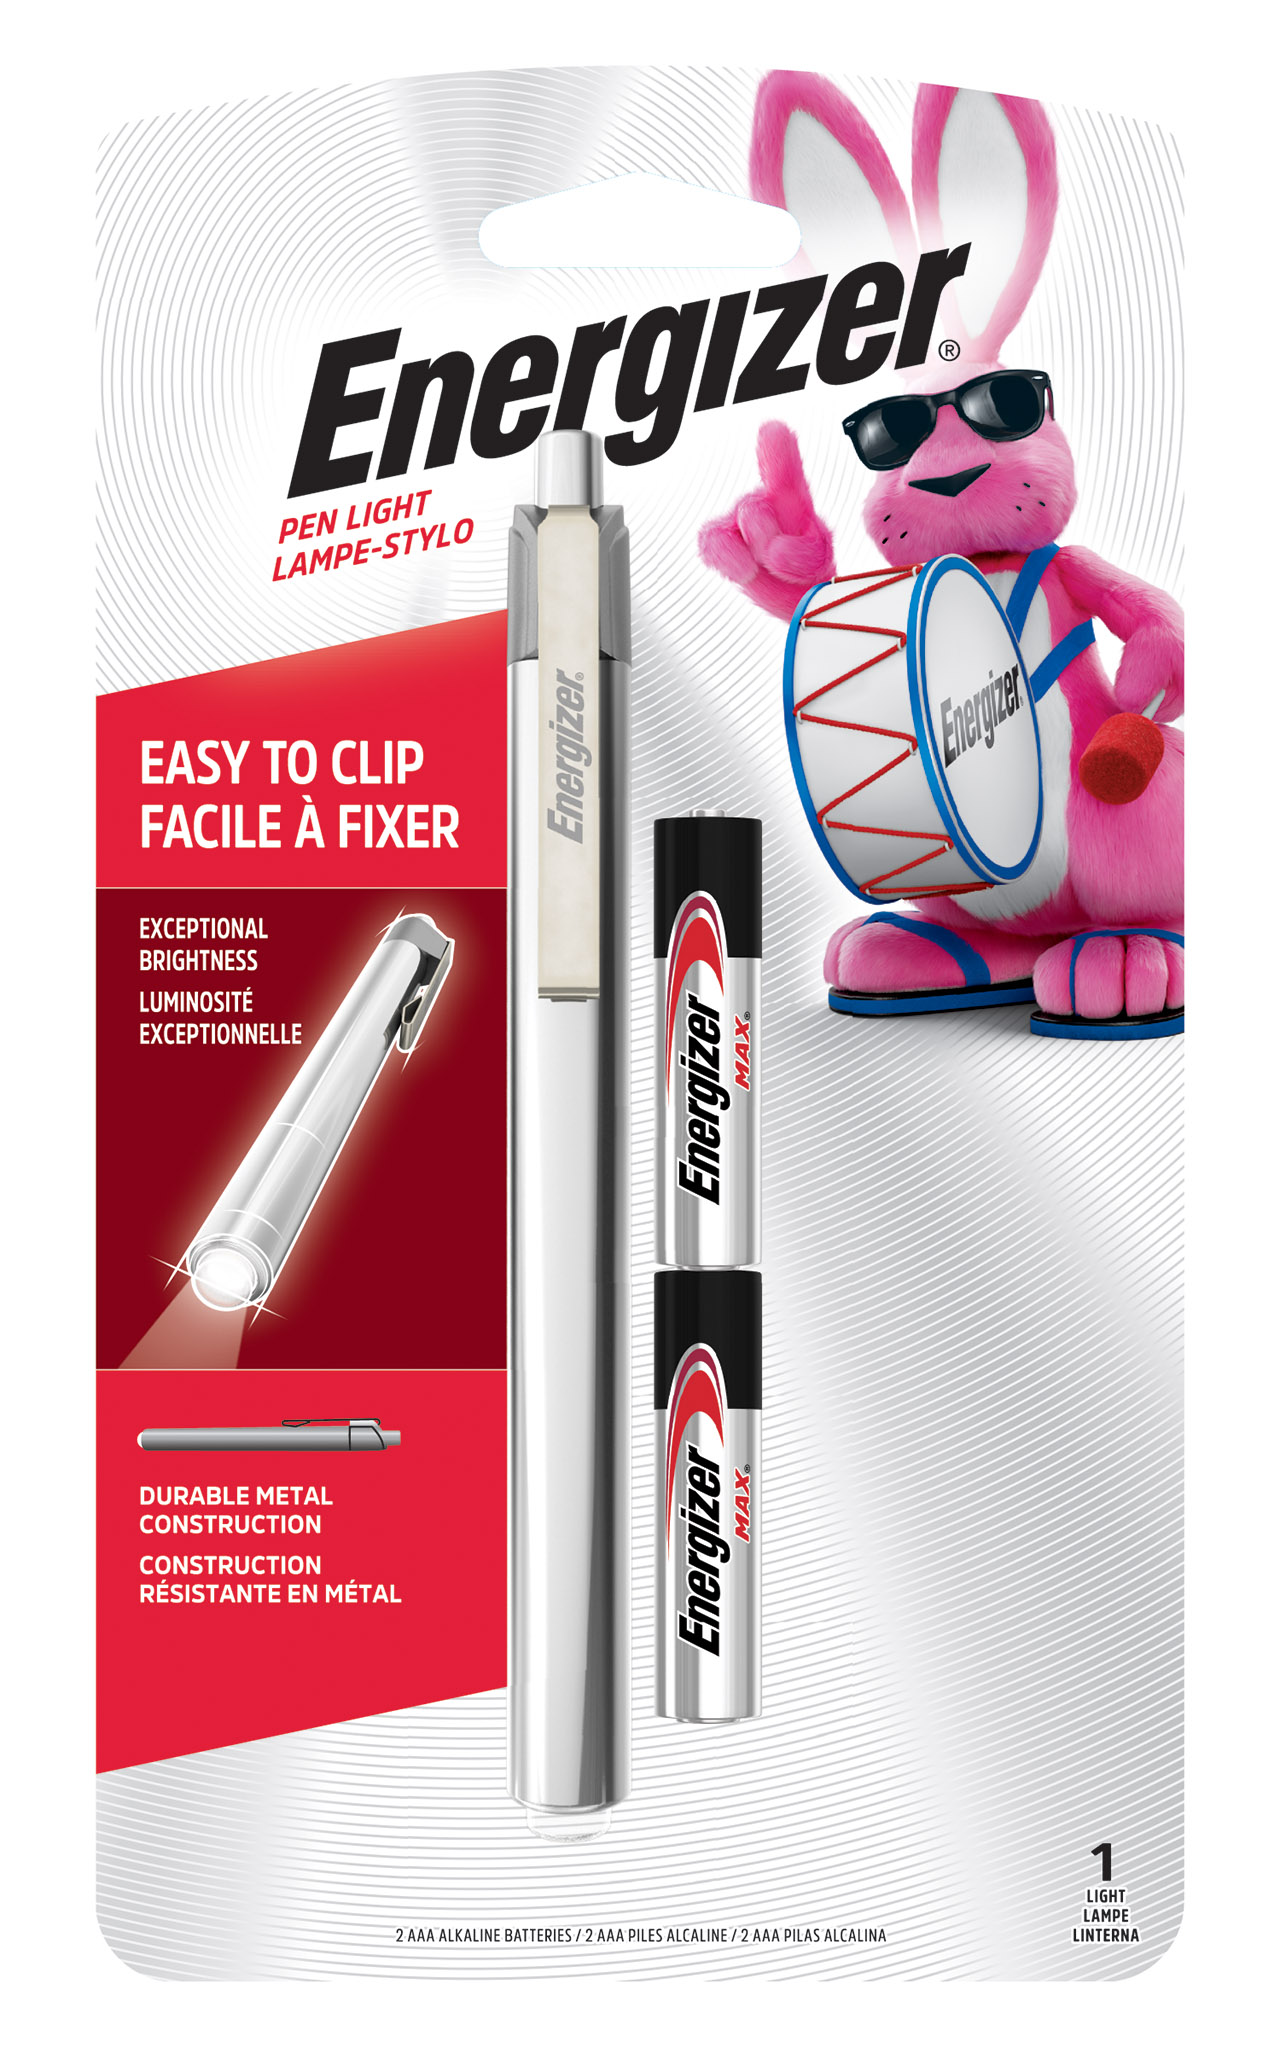 a package of the Energizer LED Pen Light